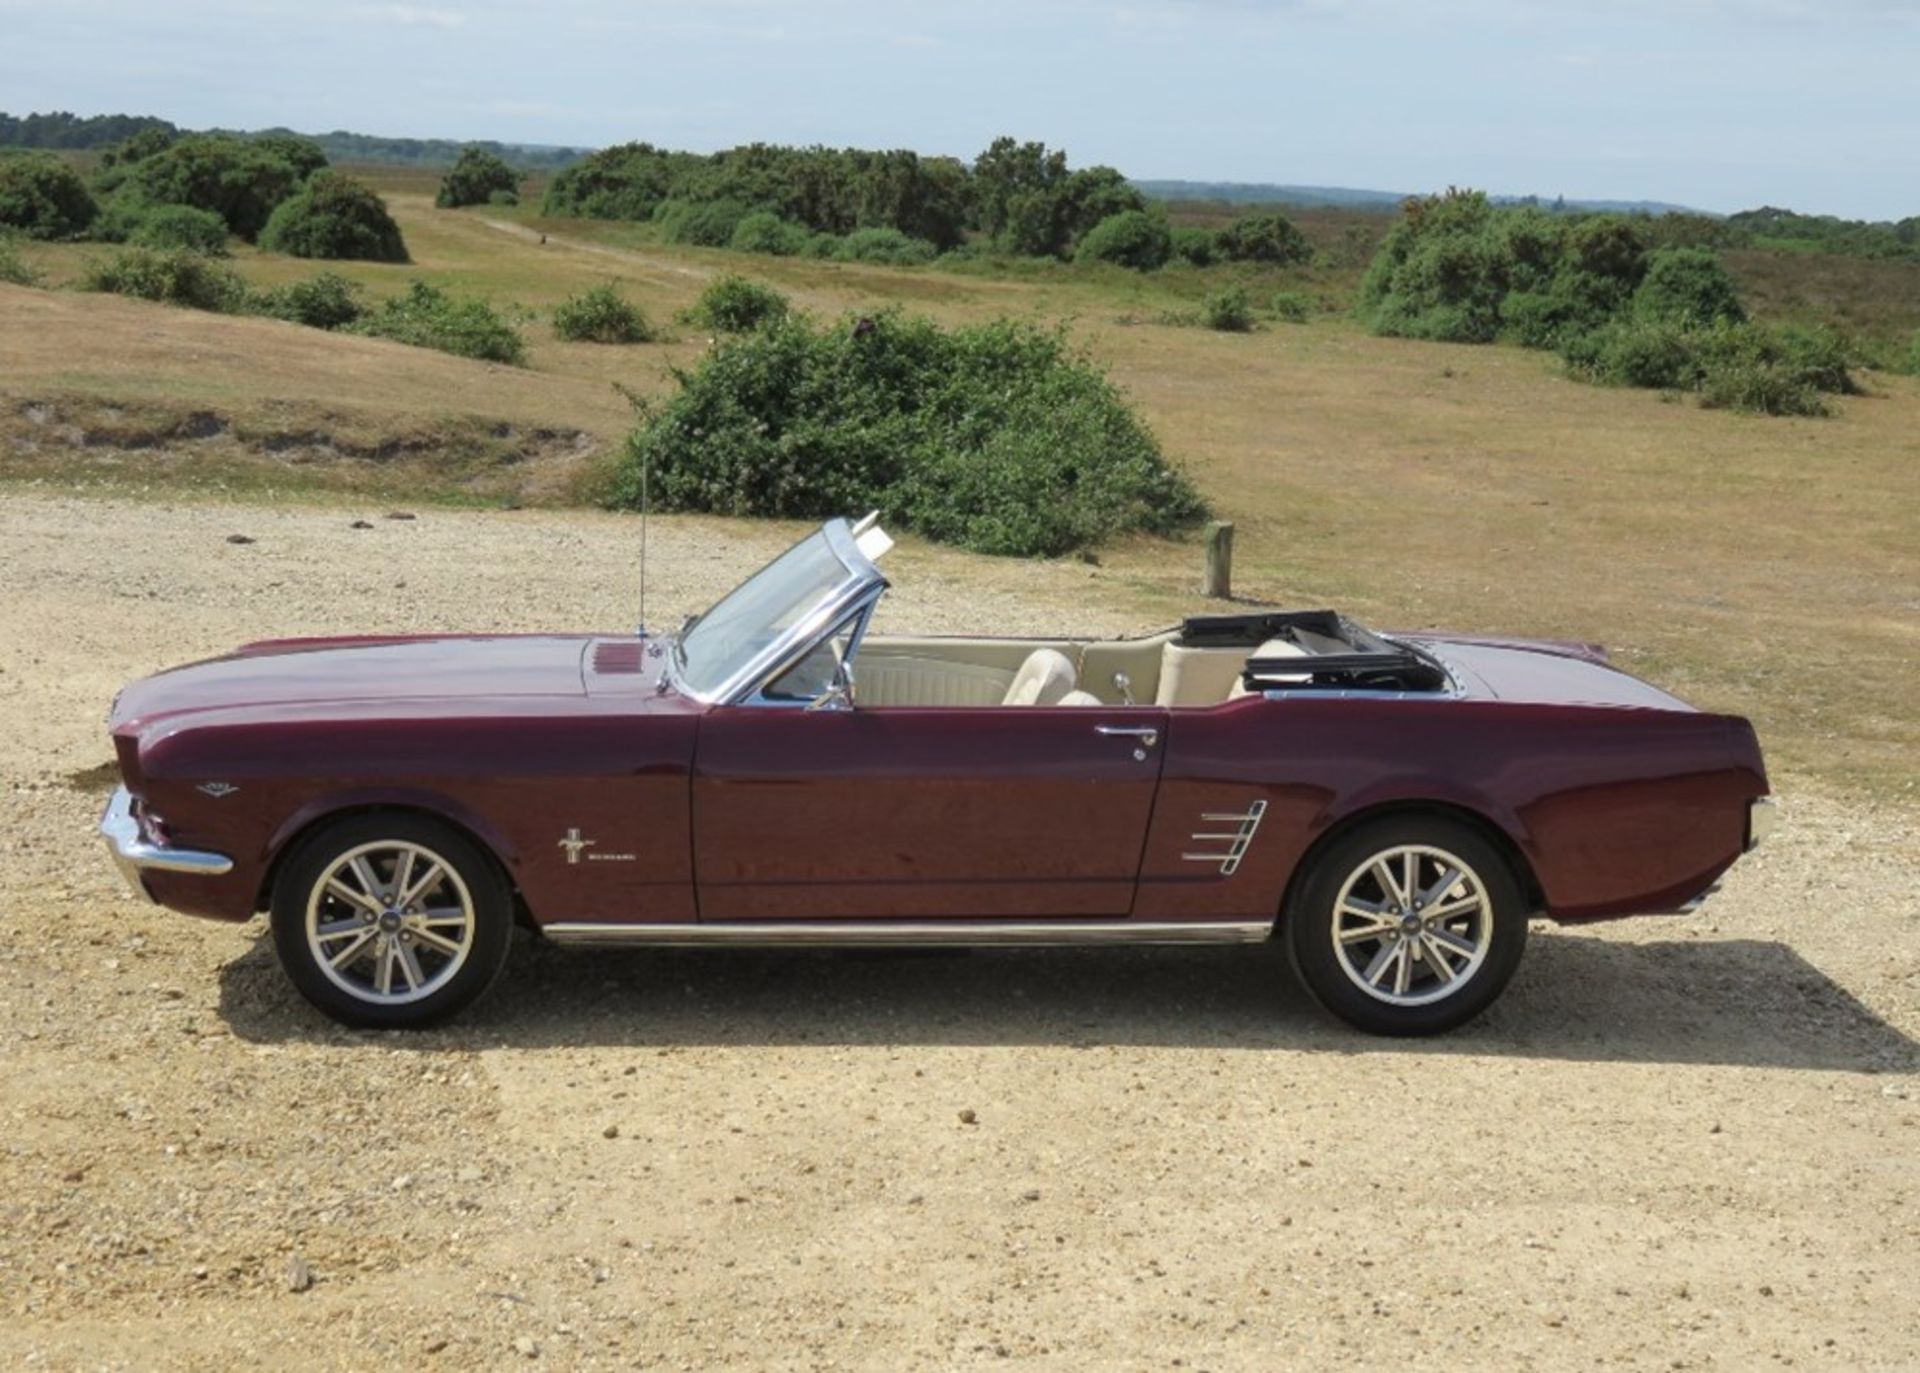 1965 Ford Mustang Convertible (289ci) - Image 2 of 5